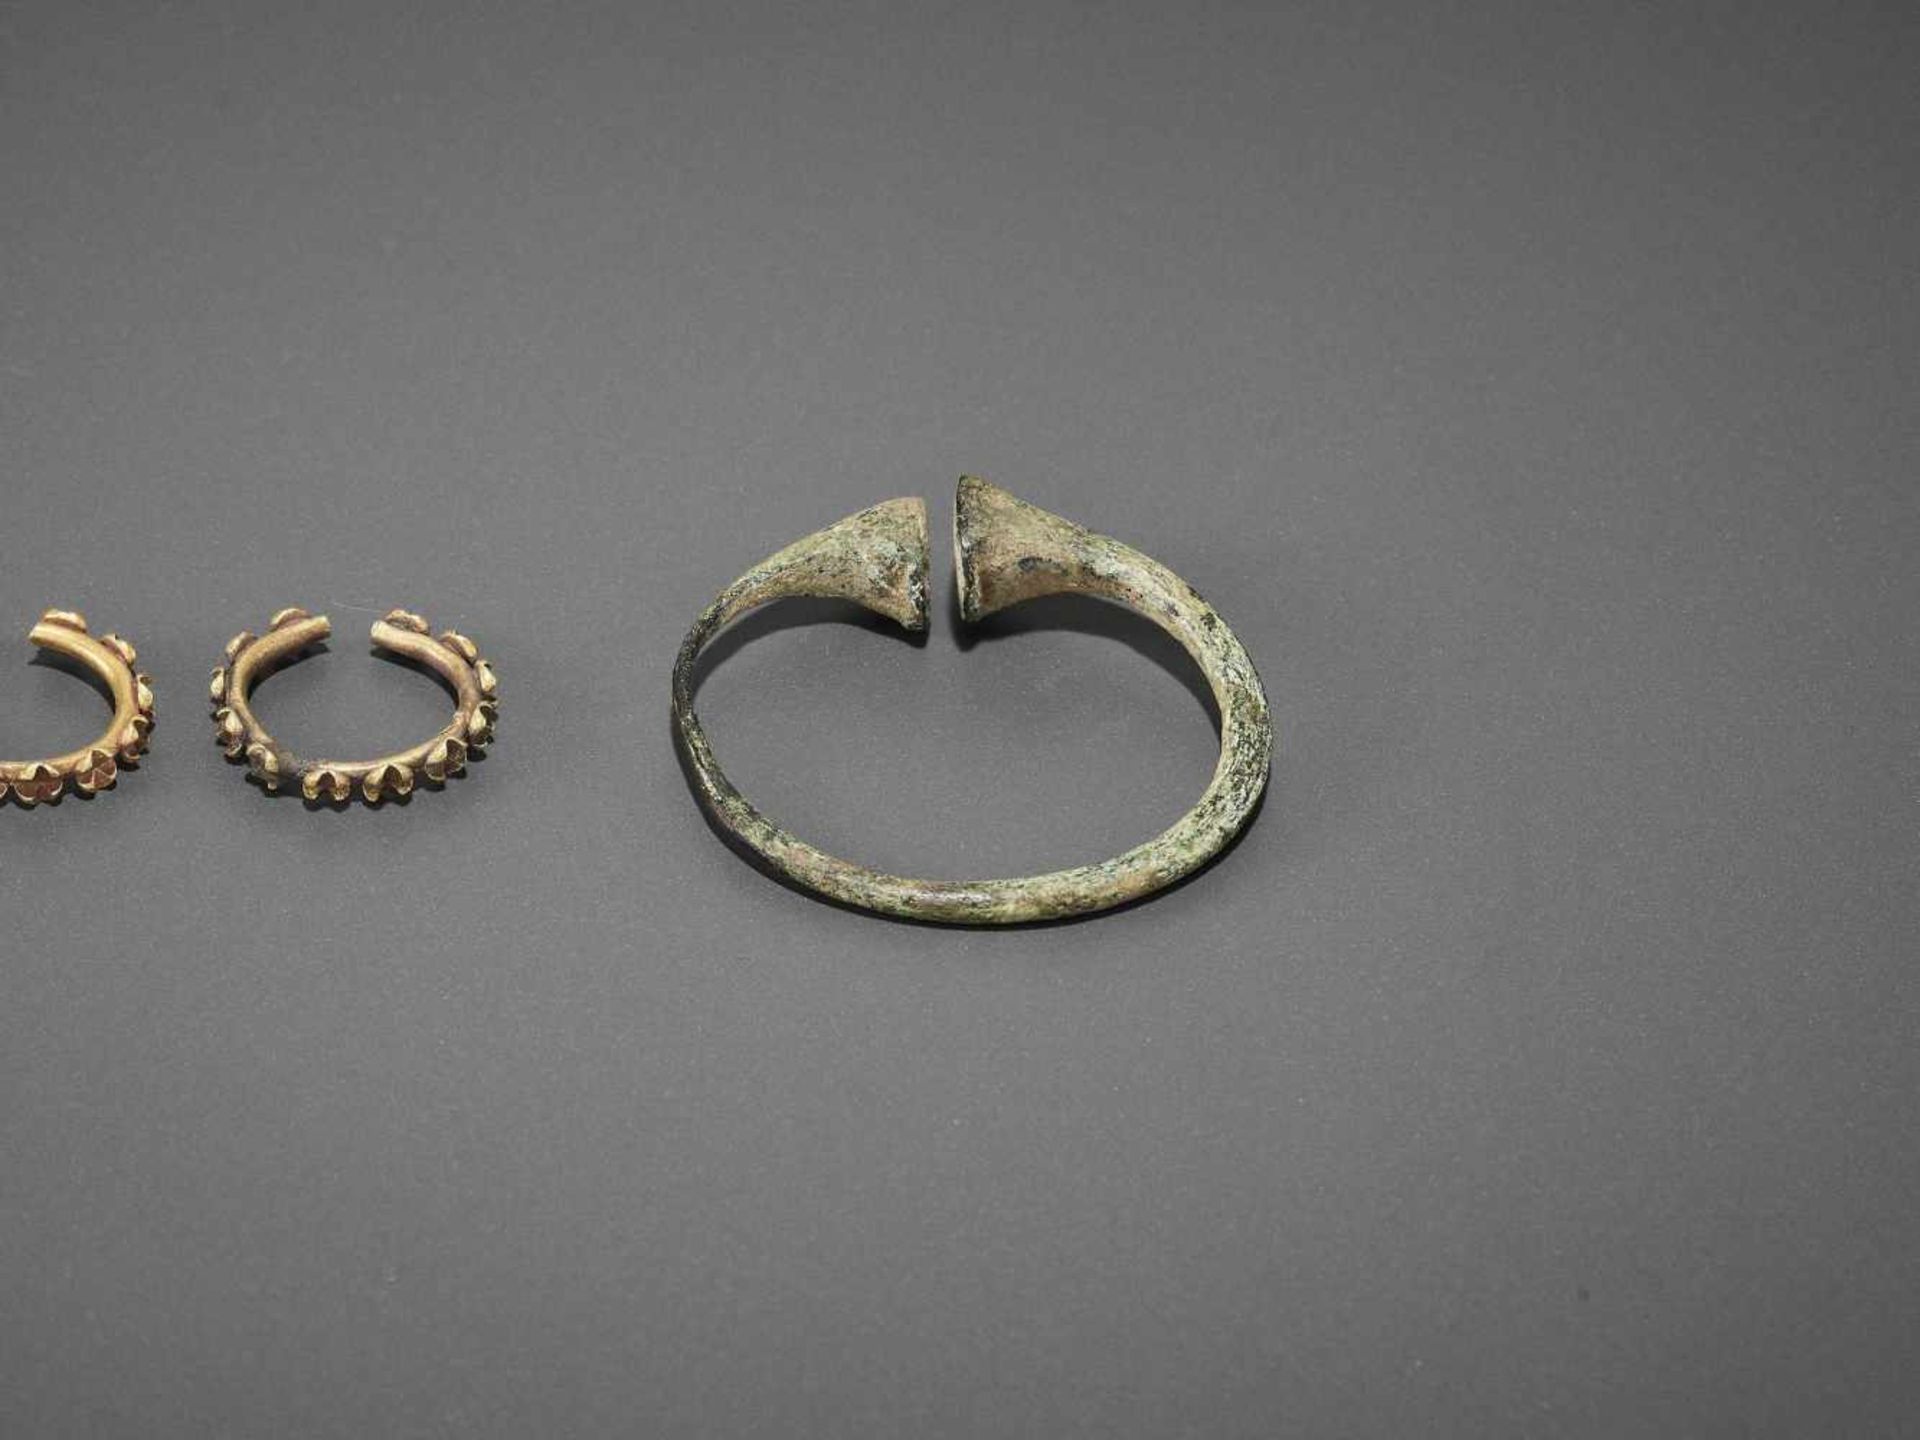 FIVE BACTRIAN GOLD AND BRONZE EARRINGS - Image 4 of 6